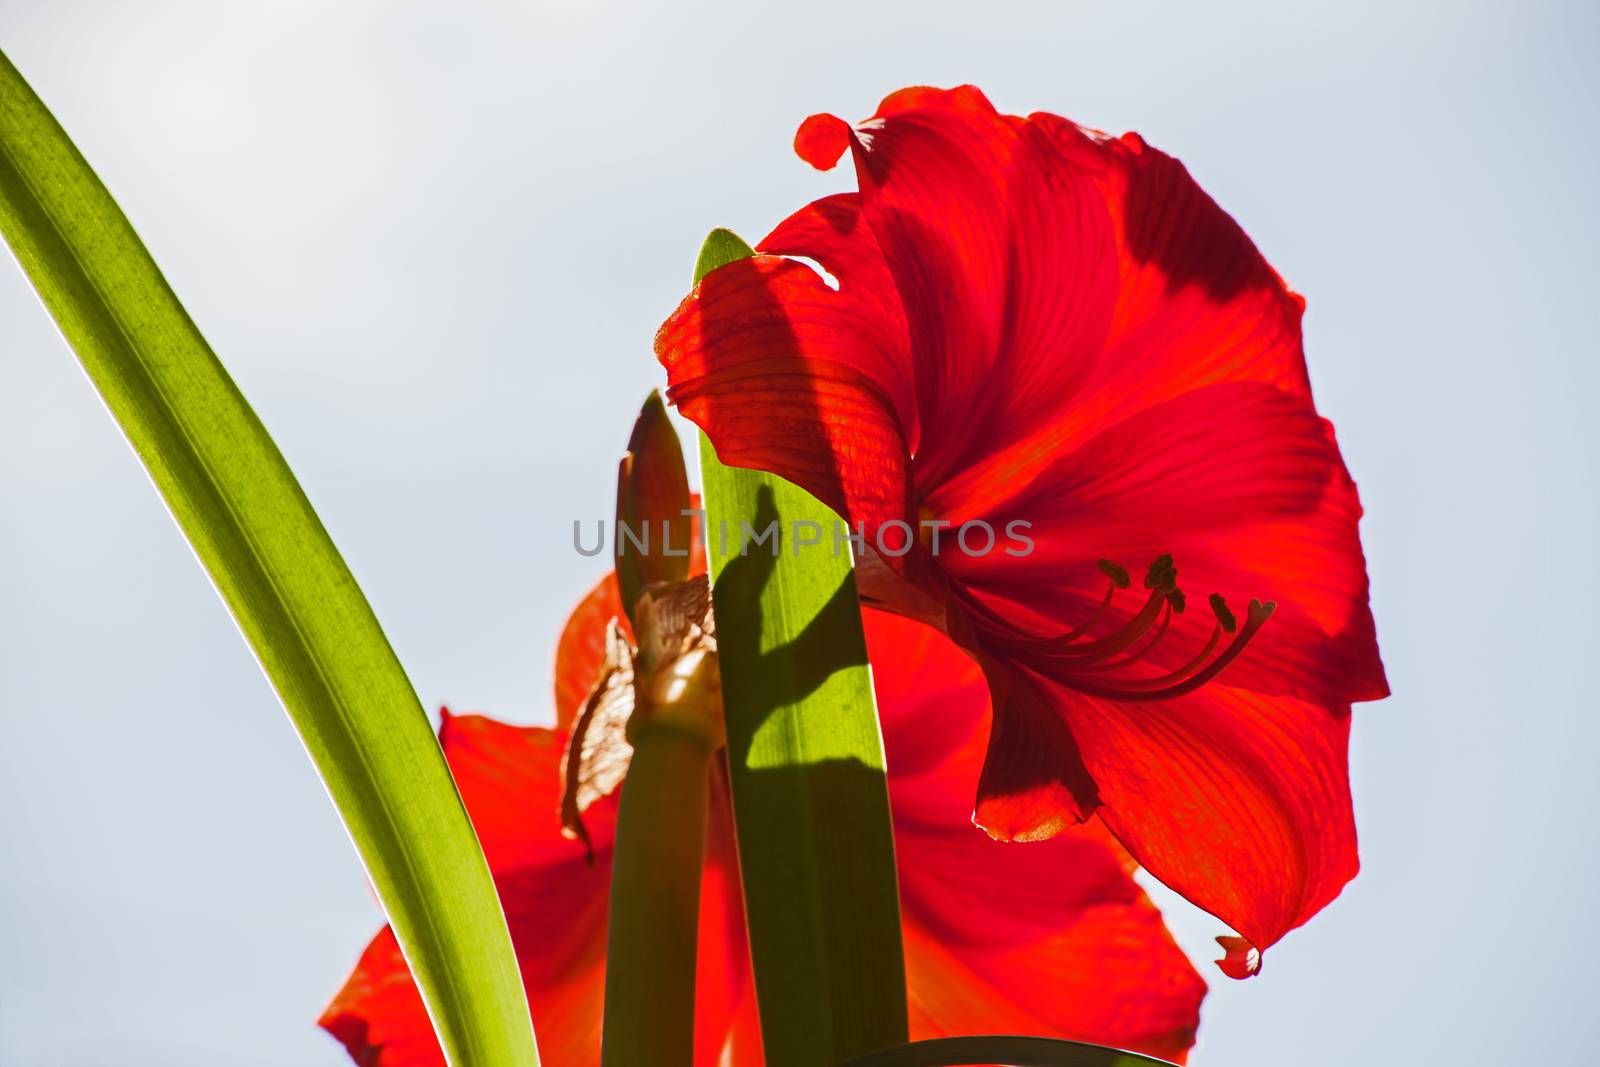 Red Amaryllis flower photographed against a pale blue sky